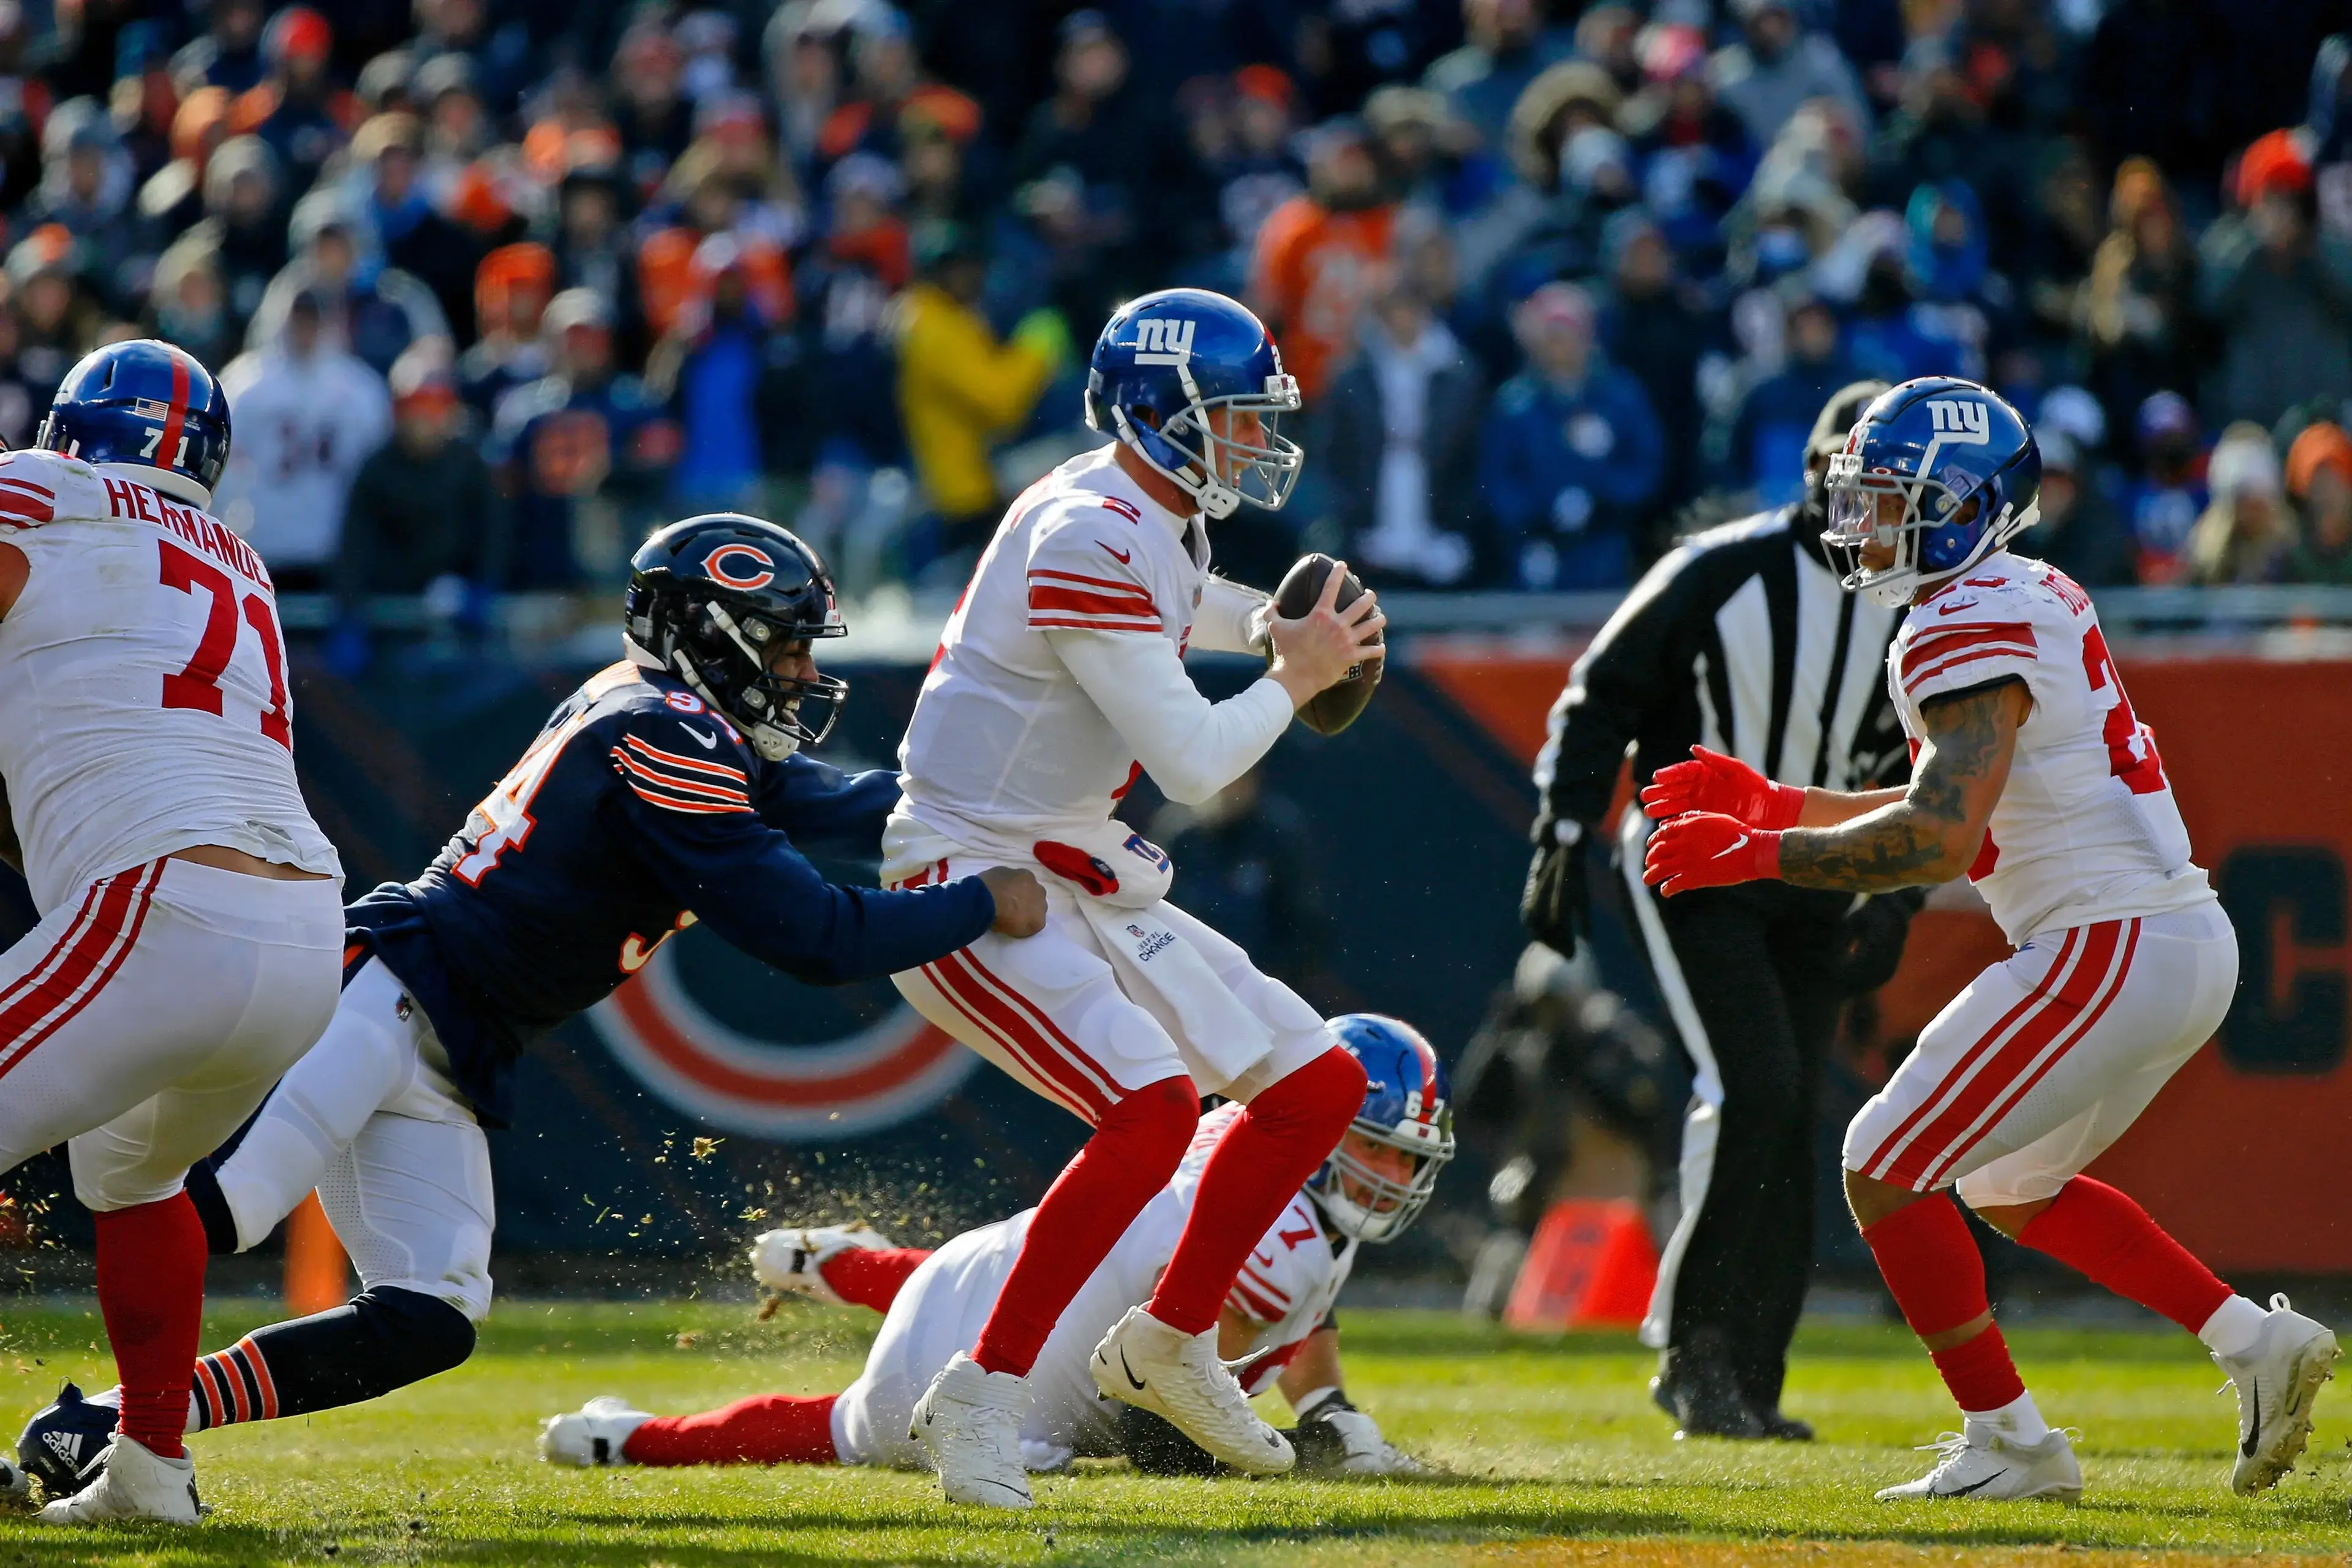 New York Giants quarterback Mike Glennon (2) evades the tackle of Chicago Bears outside linebacker Robert Quinn (94) during the first half at Soldier Field. / Jon Durr- USA TODAY Sports